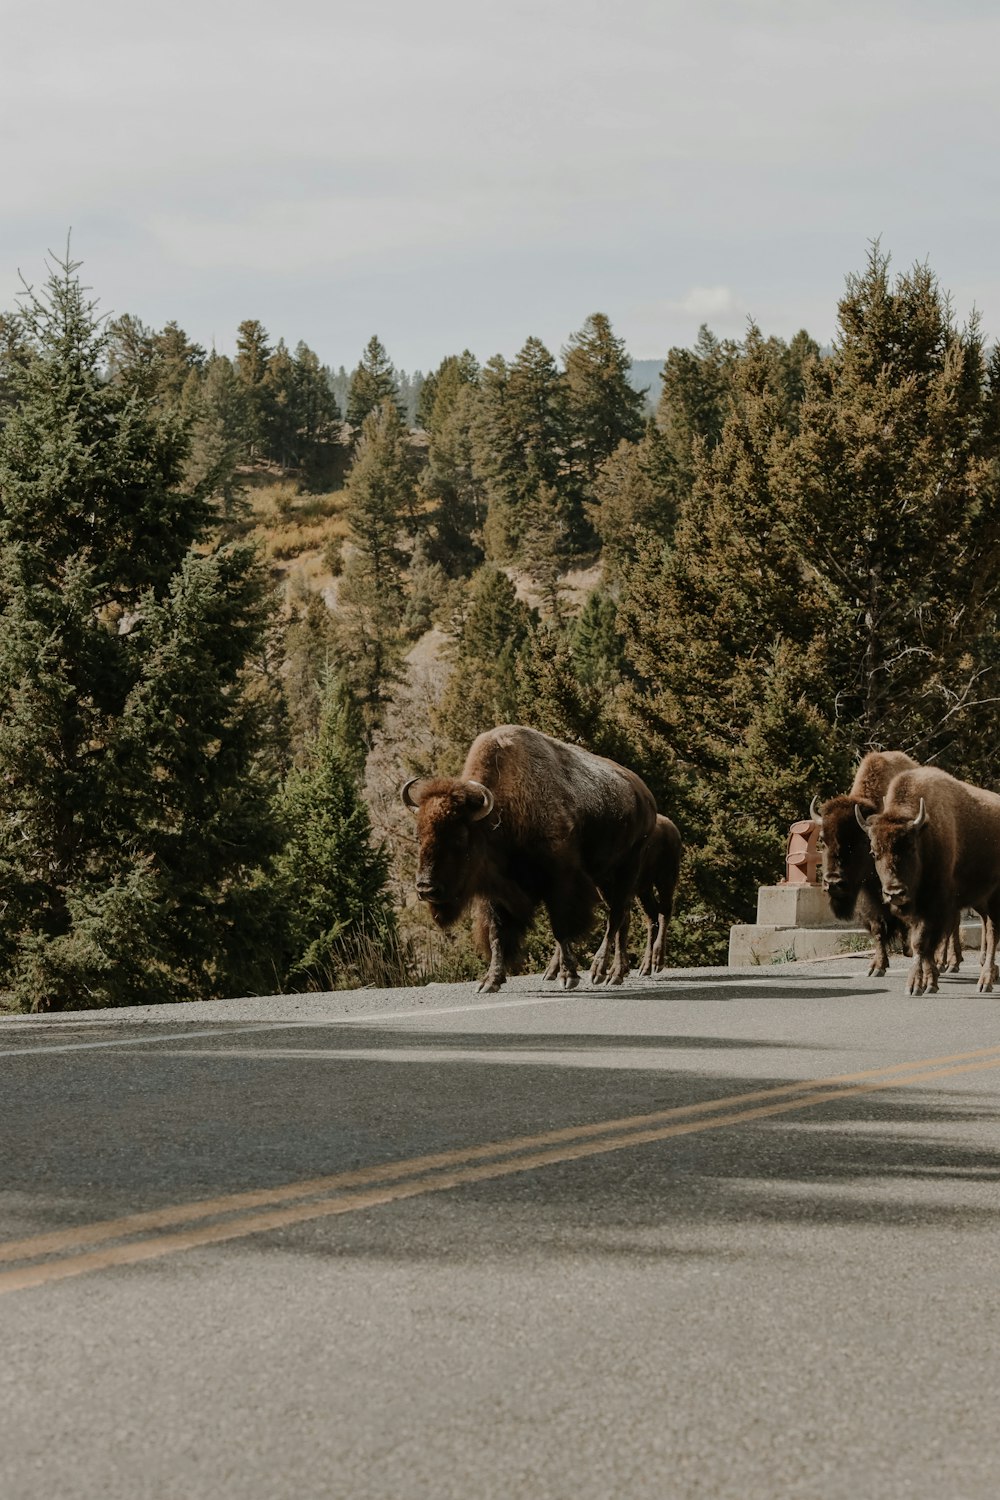 three bison crossing a road in front of a forest